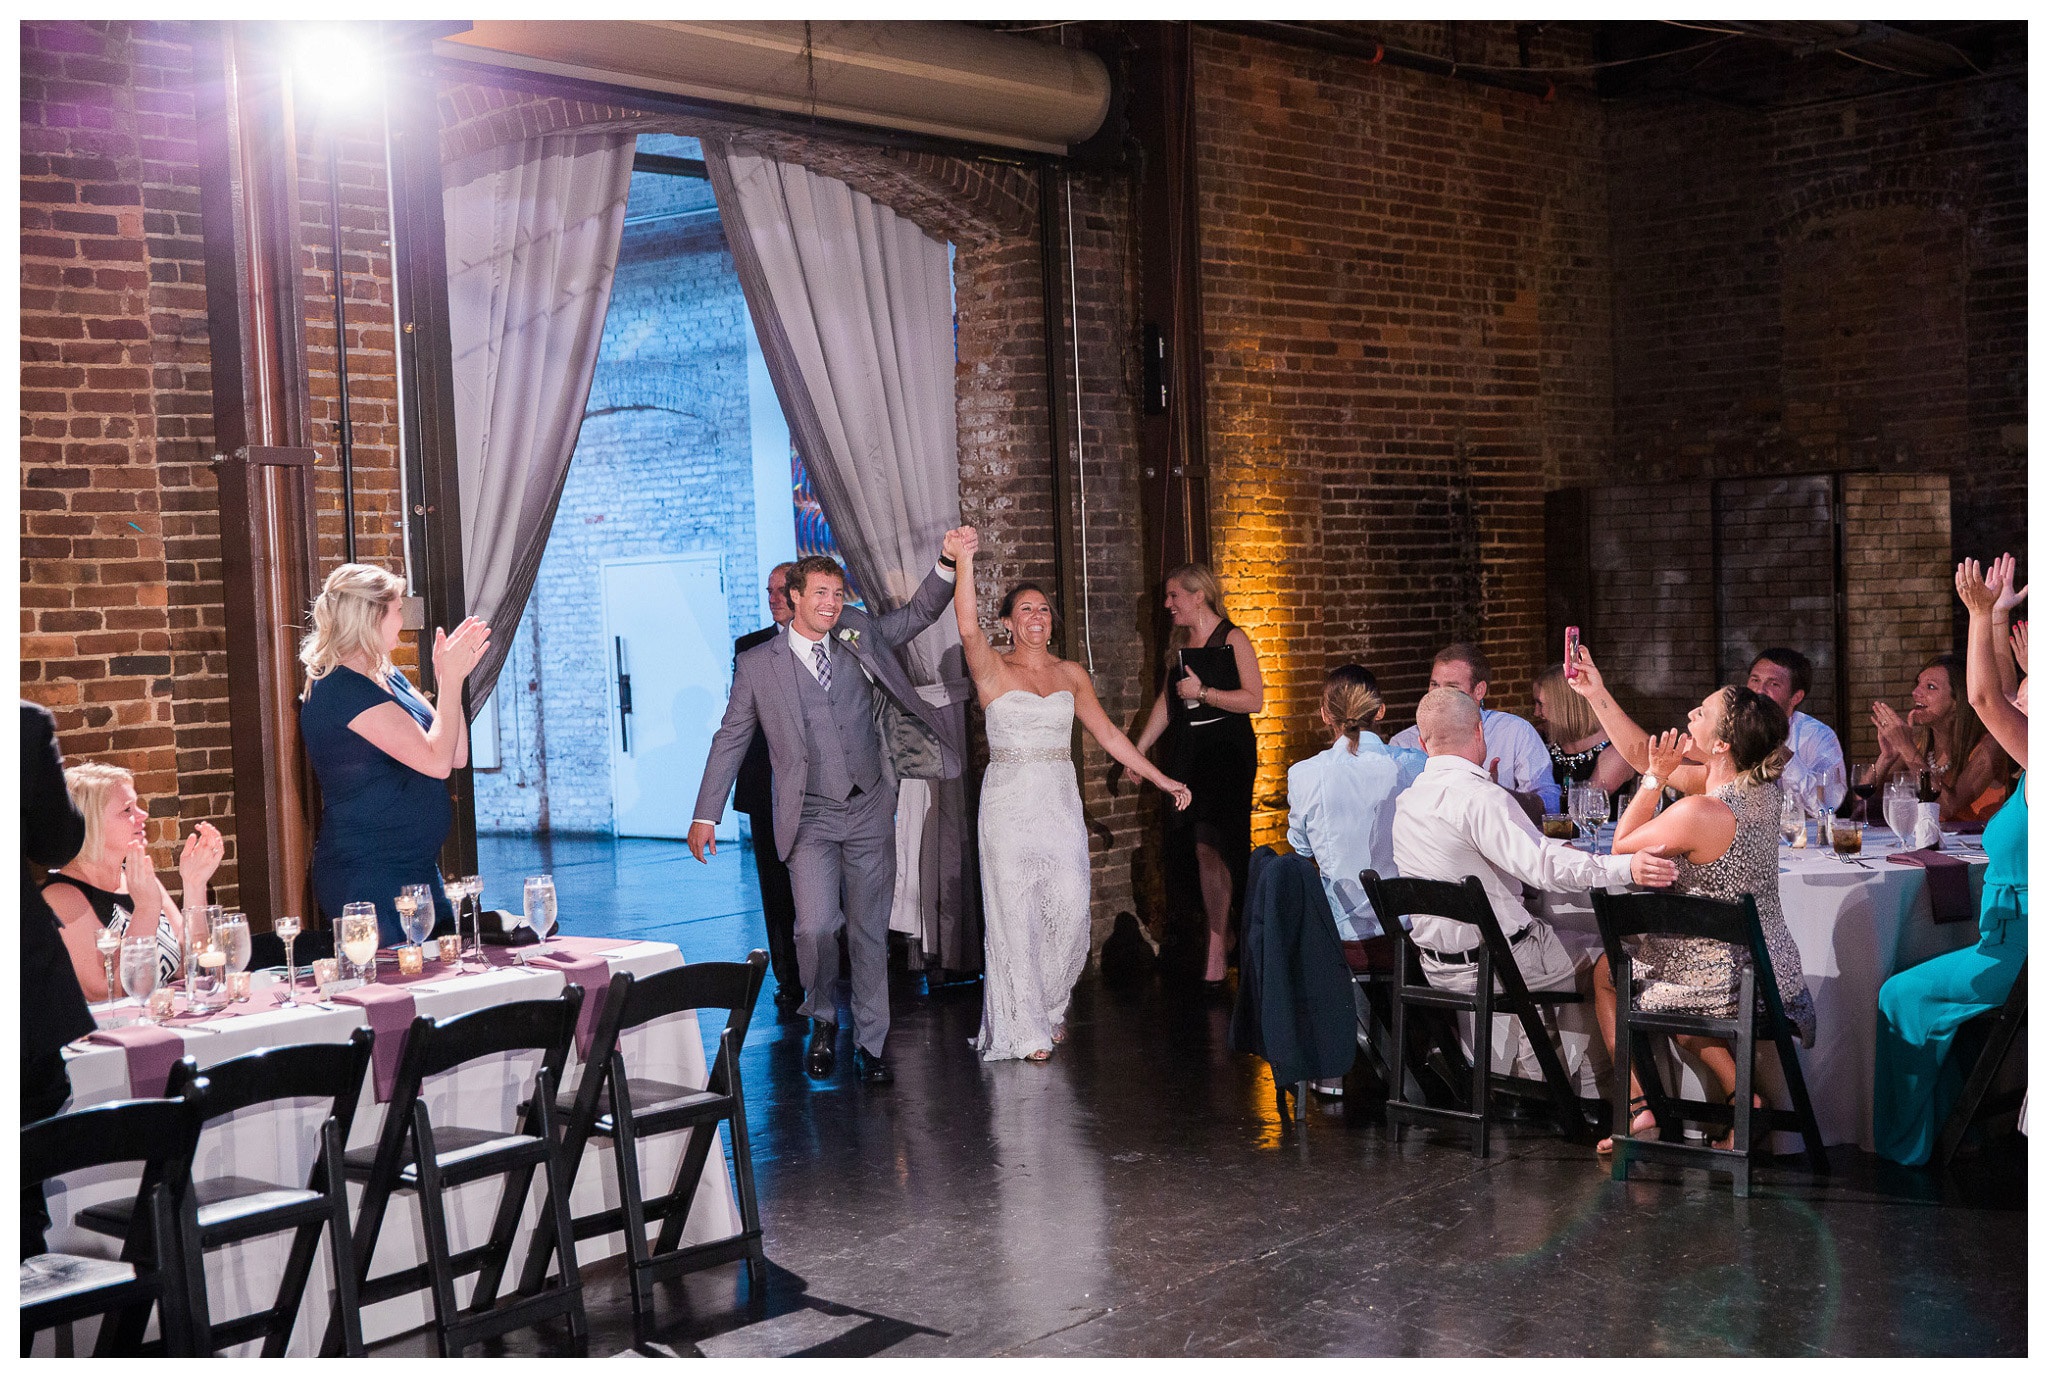 Groom and Bride arriving at the reception to the applause of their guests - Venue and Catering – King plow Event Gallery and Bold American Events Decor and flowers – Stylish Stems Music and Band – Seven Sharp Nine Transportation – Georgia Trolley Photographer One Life Photography